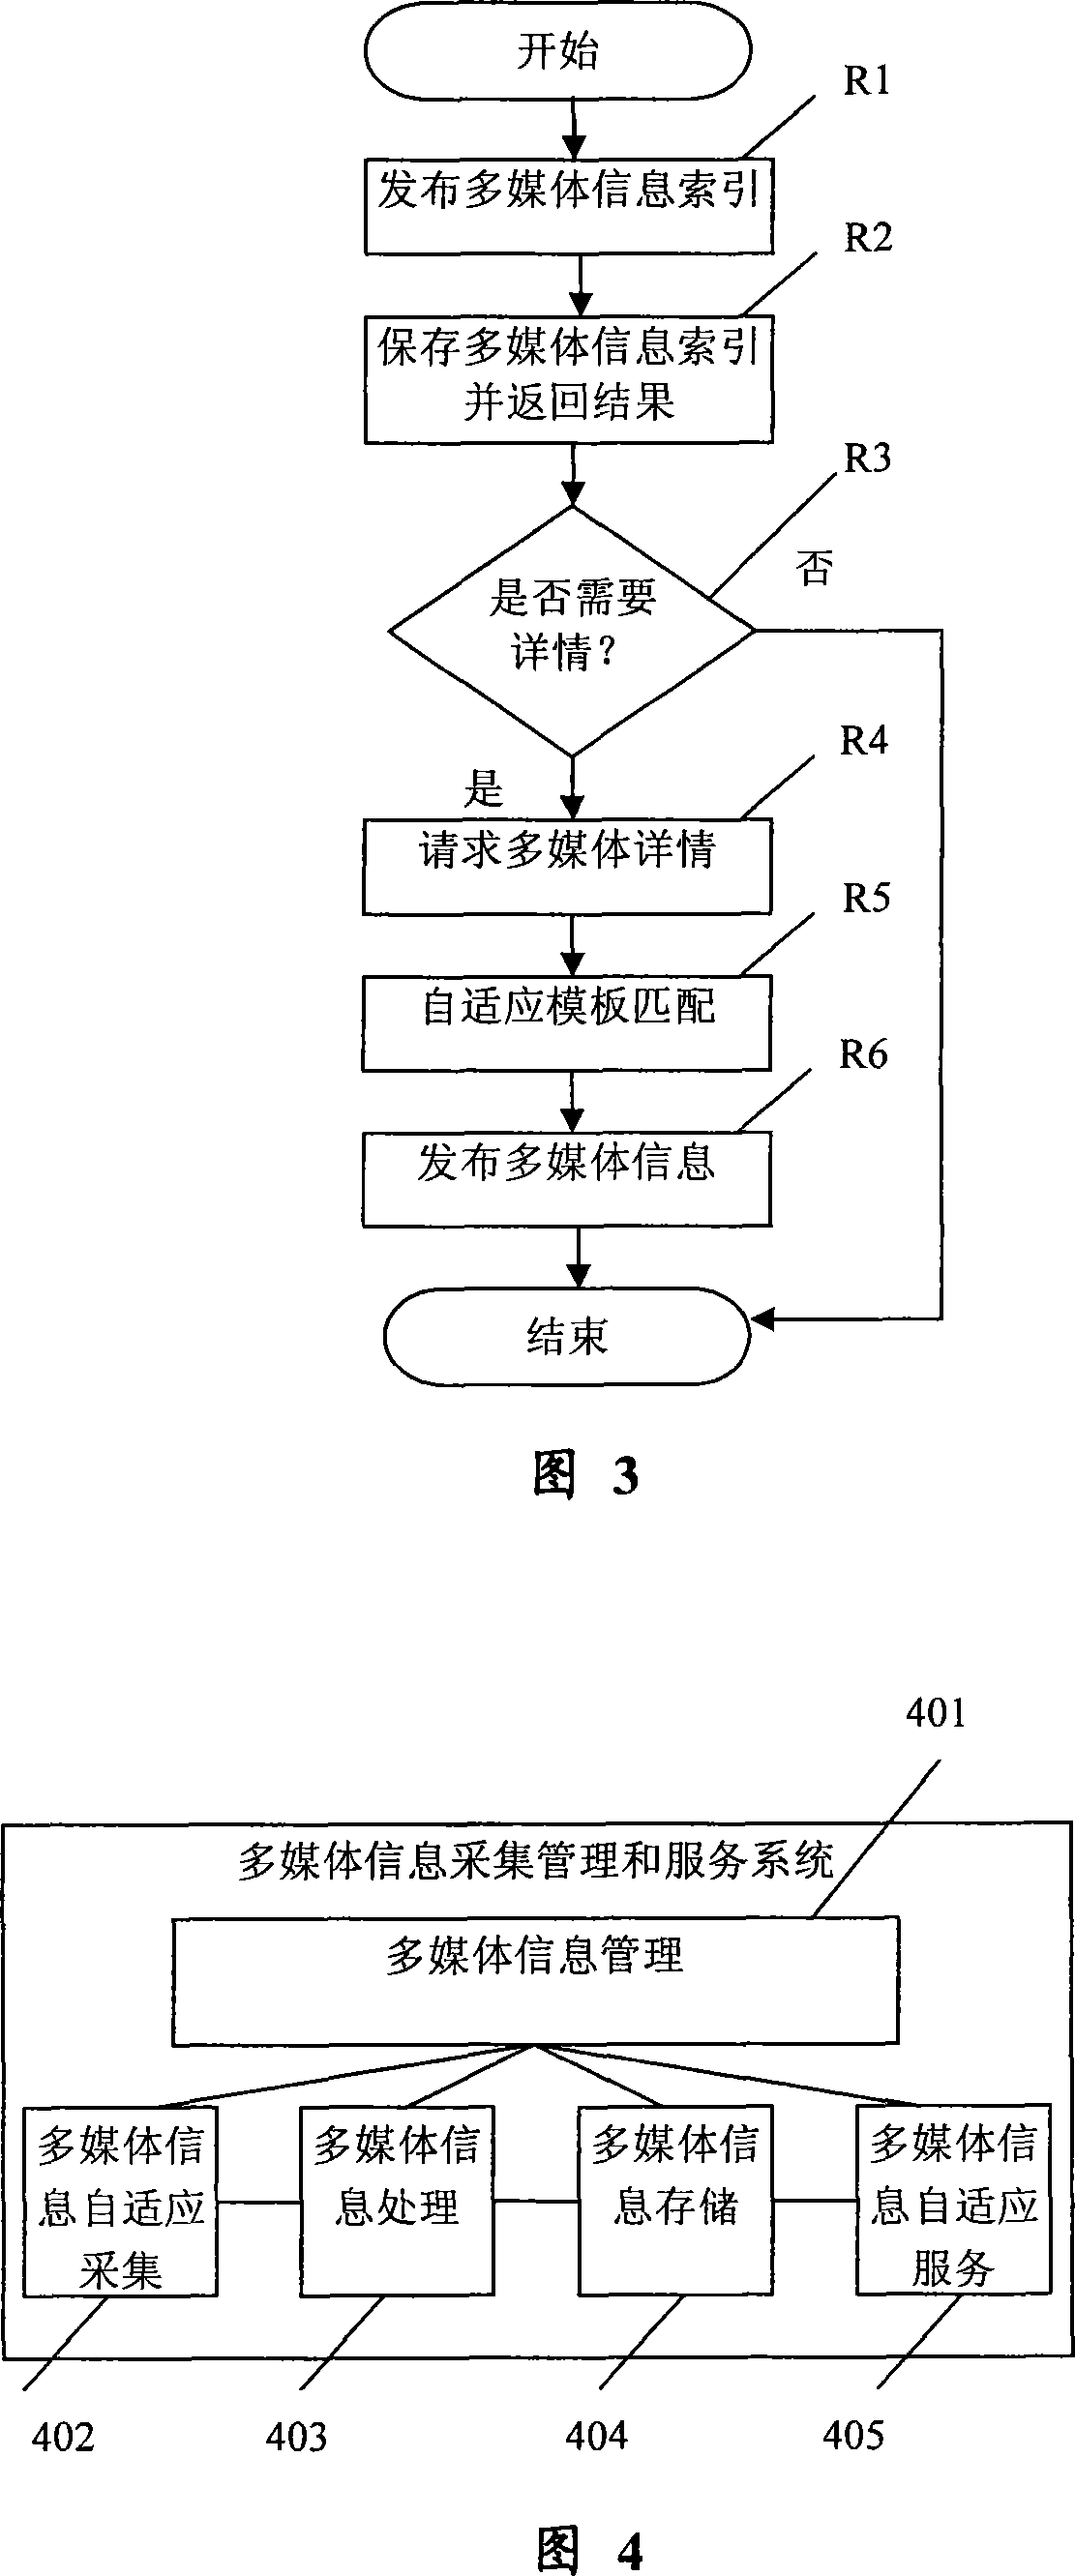 System, method and device for multimedia information collection, management and service